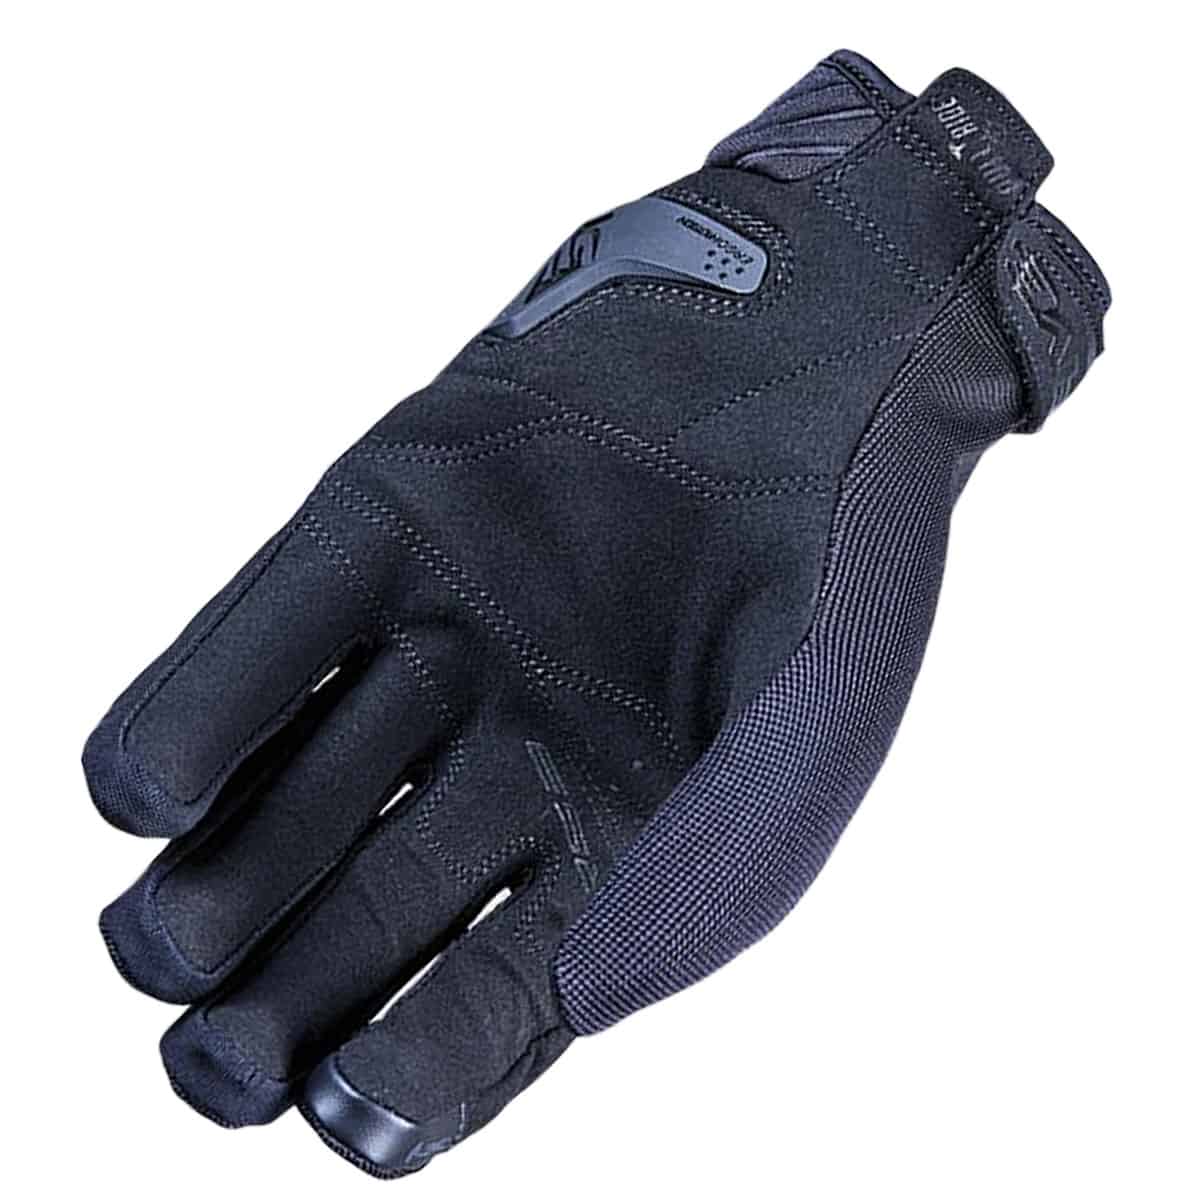 Five RS3 Evo Ladies Gloves: An Urban Summer essential in a women's fit palm